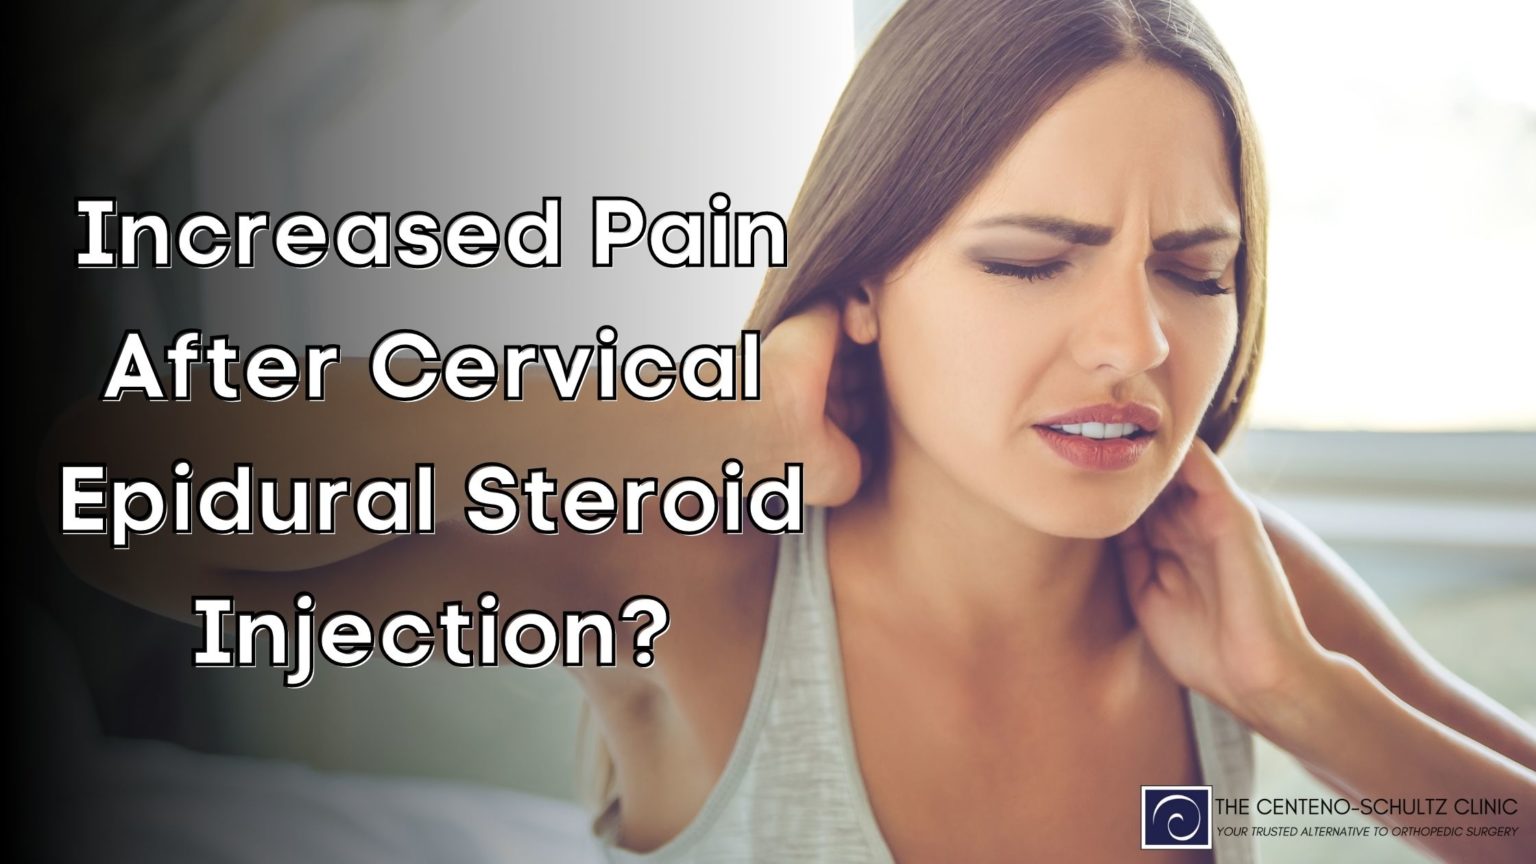 Why is pain worse after cervical epidural steroid injection?